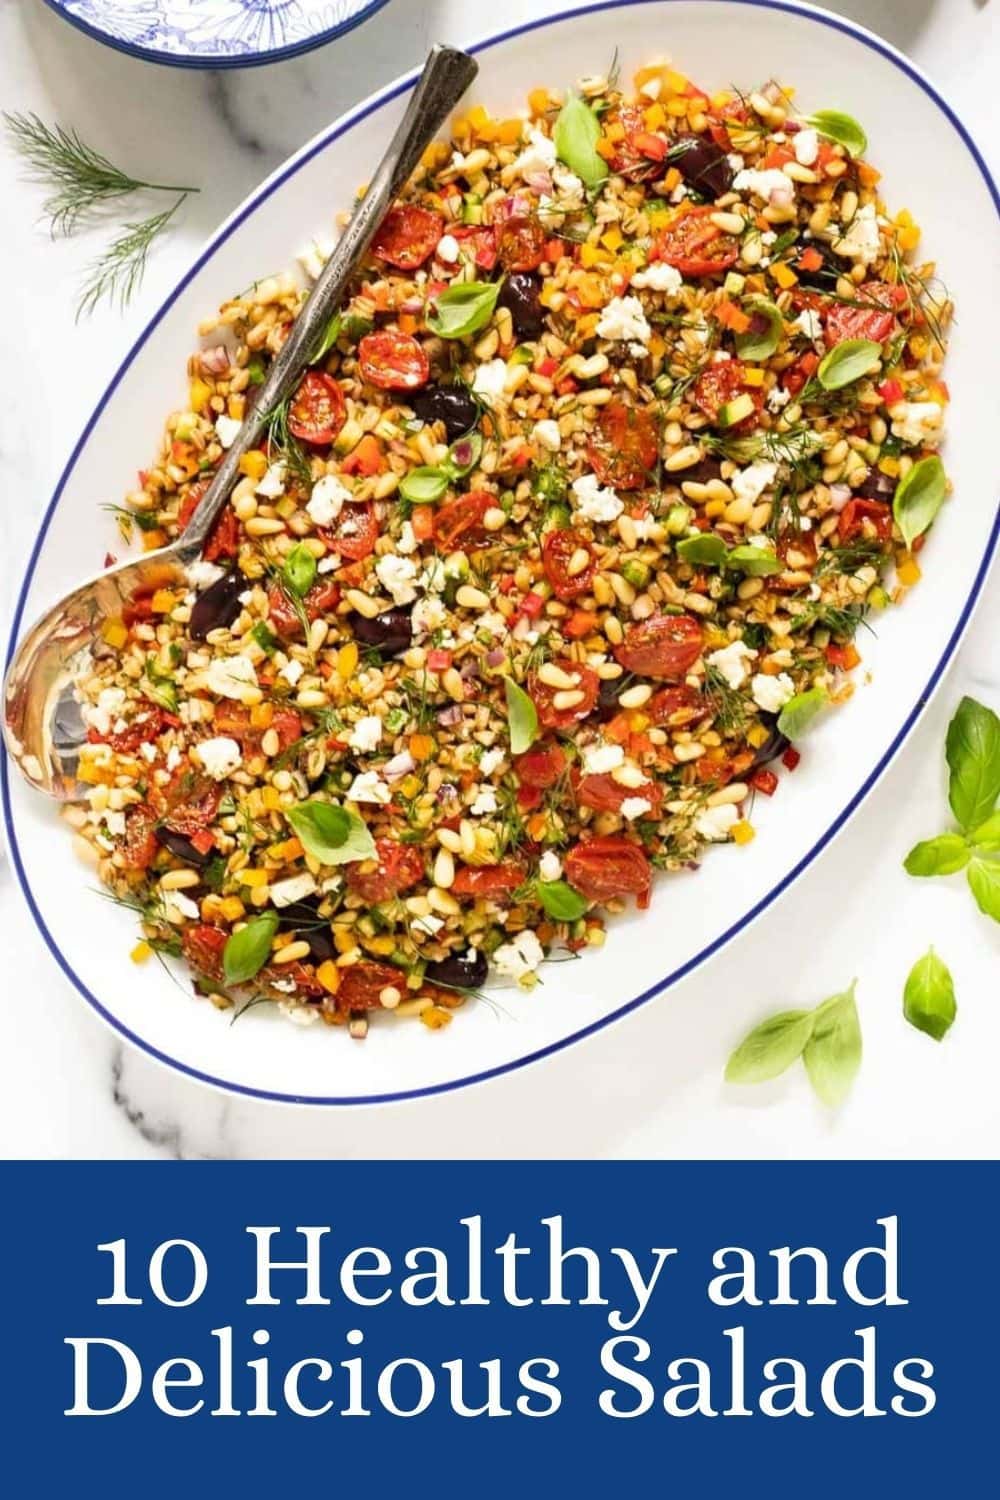 Salad Days! Get ready for Spring with these healthy delicious salad recipes!